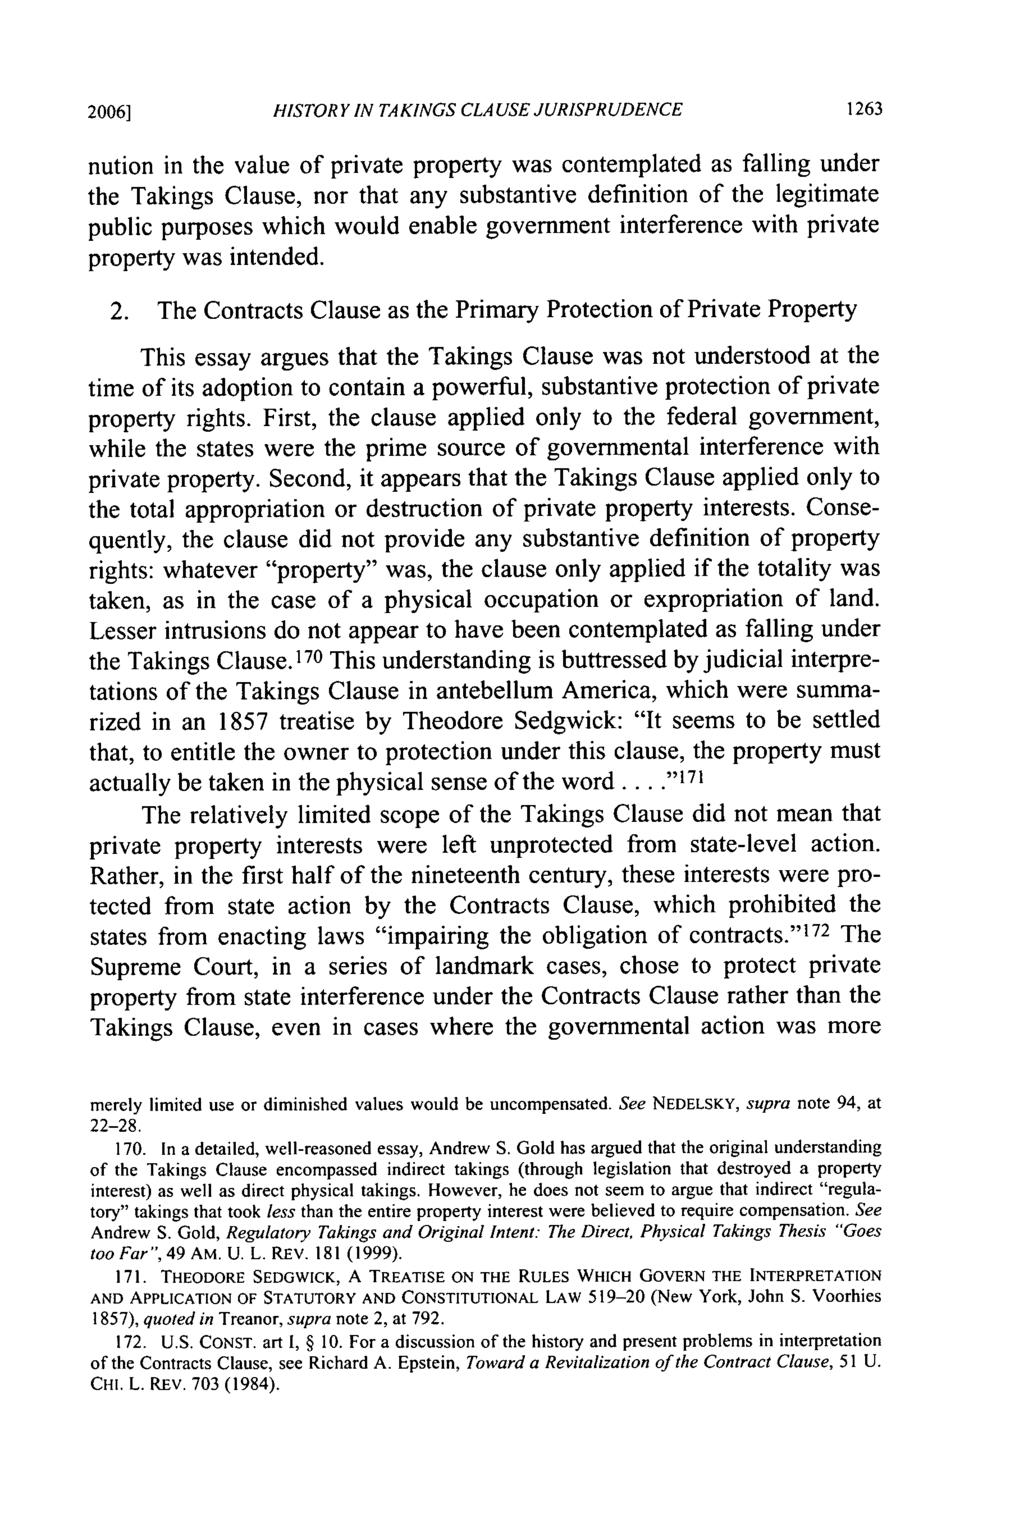 20061 HISTORY IN TAKINGS CLAUSE JURISPRUDENCE nution in the value of private property was contemplated as falling under the Takings Clause, nor that any substantive definition of the legitimate